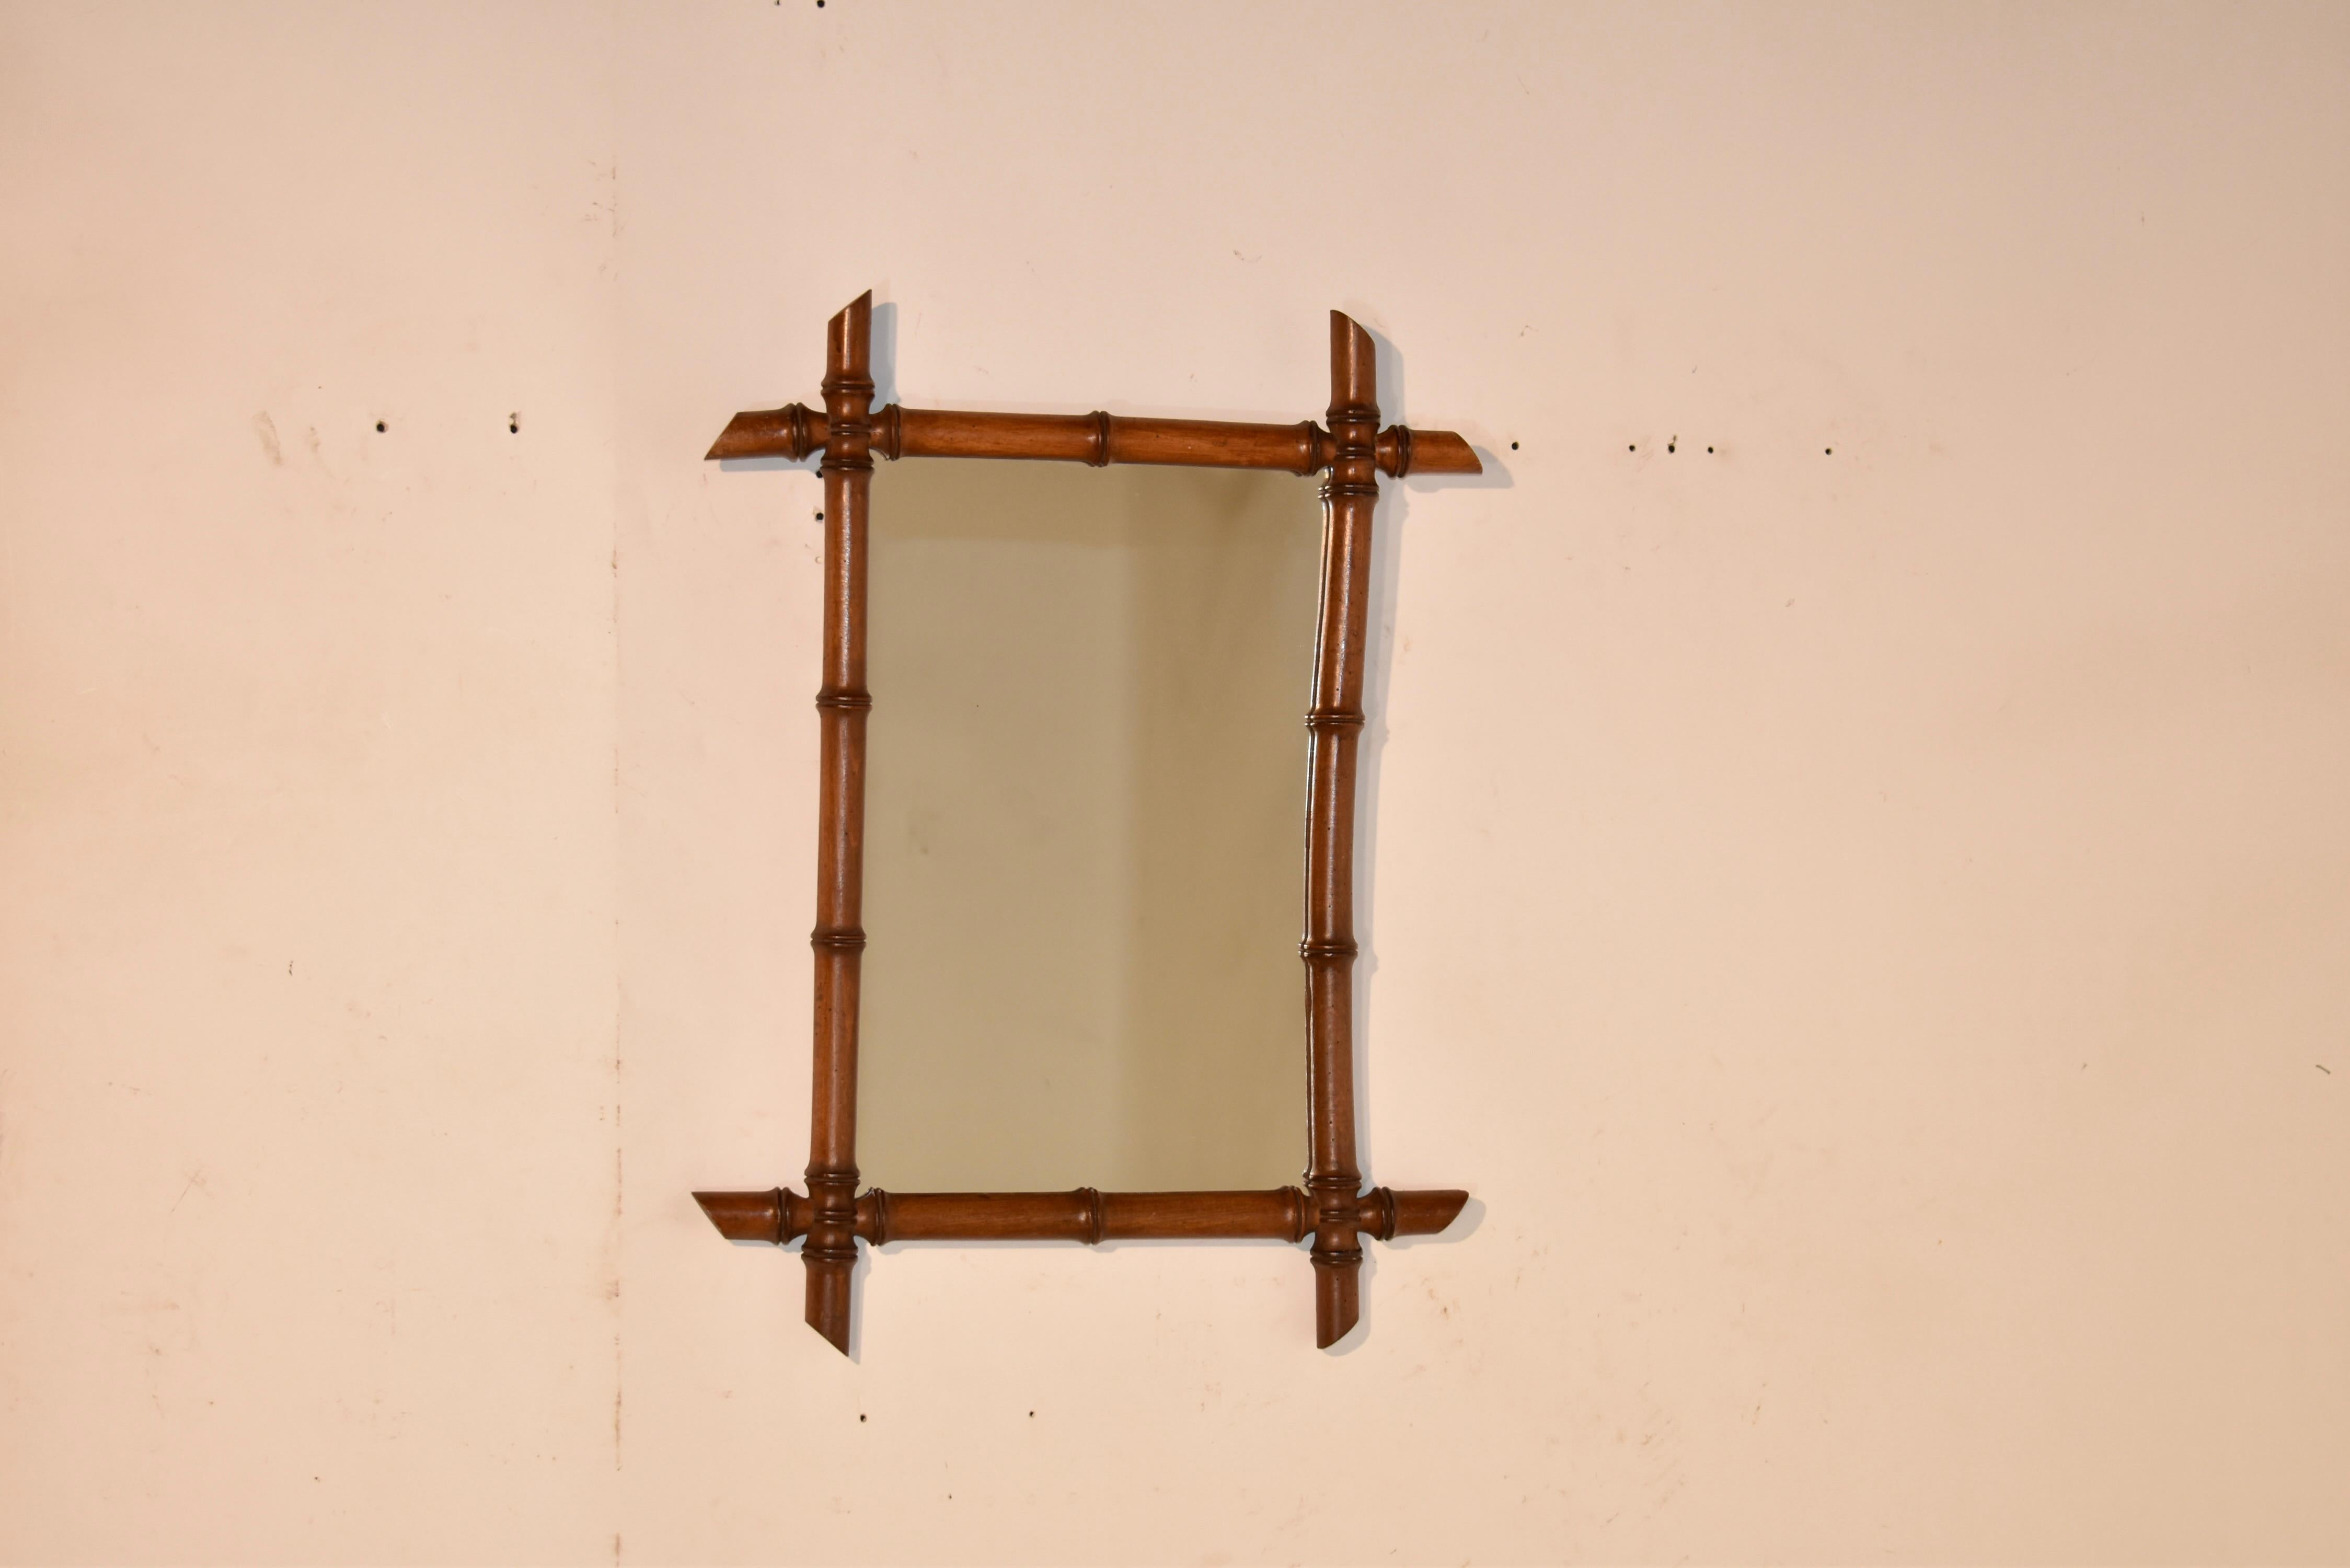 Late 19th century faux bamboo wall mirror from France.  The frame is turned from cherry and is made to look like bamboo.  The frame is surrounding a mirror.  These are wonderful mirrors to compliment any style of decor.